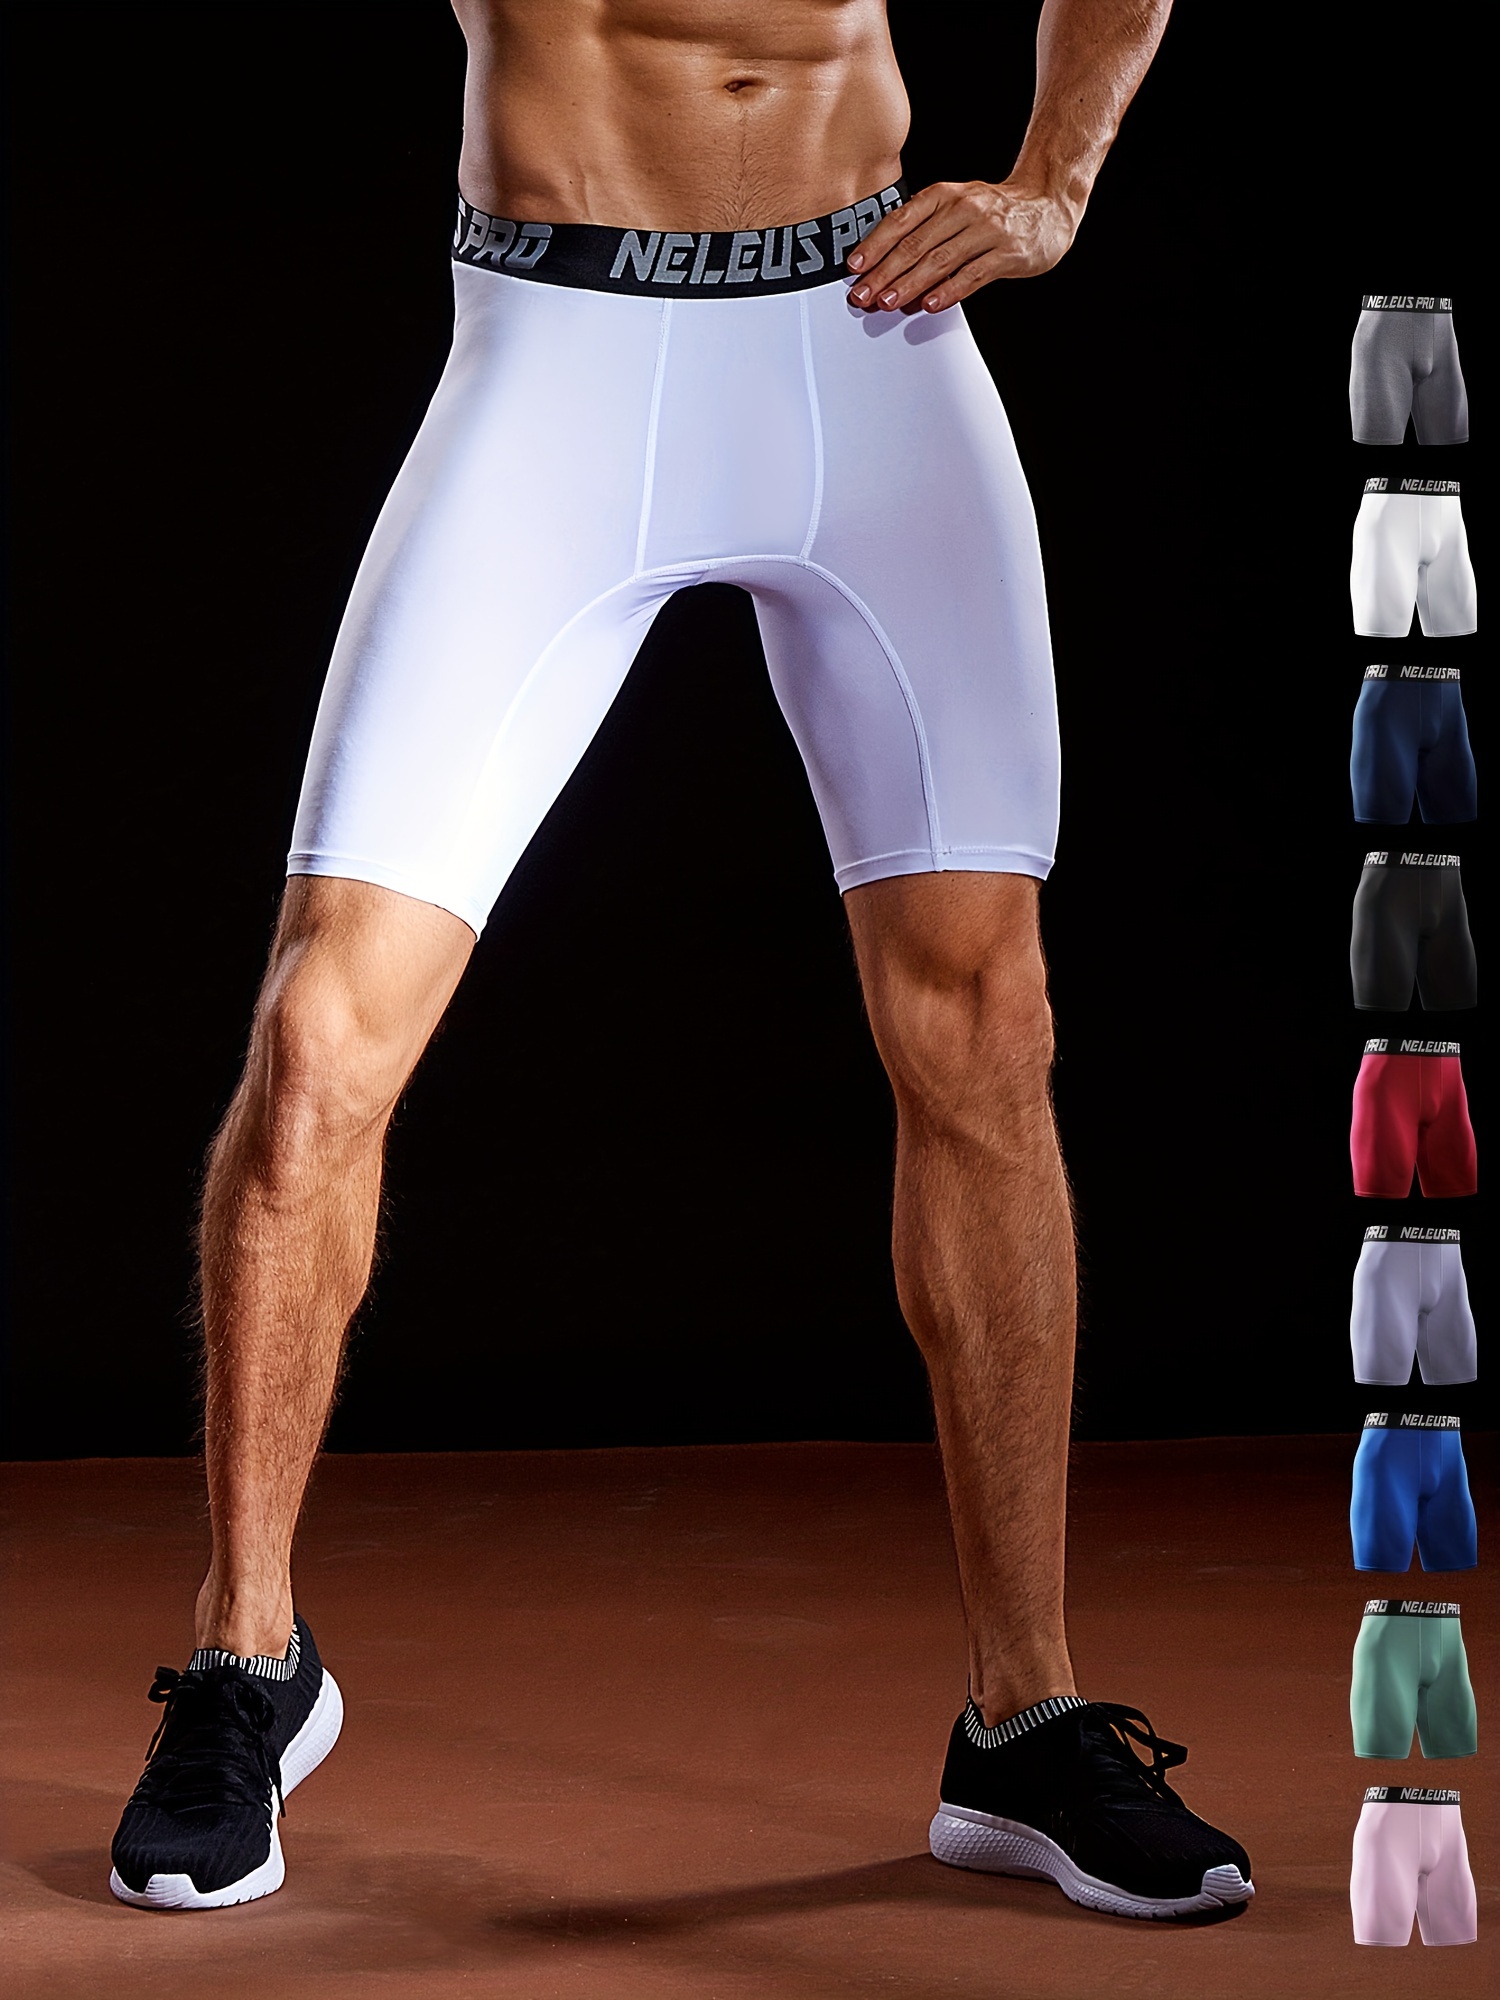 Breathable Mens Long Compression Shorts Basketball For Outdoor Sports,  Fitness, Running, And Beach Activities Quick Drying And Loose Fit Five  Point Pants From Lovedeal, $14.48